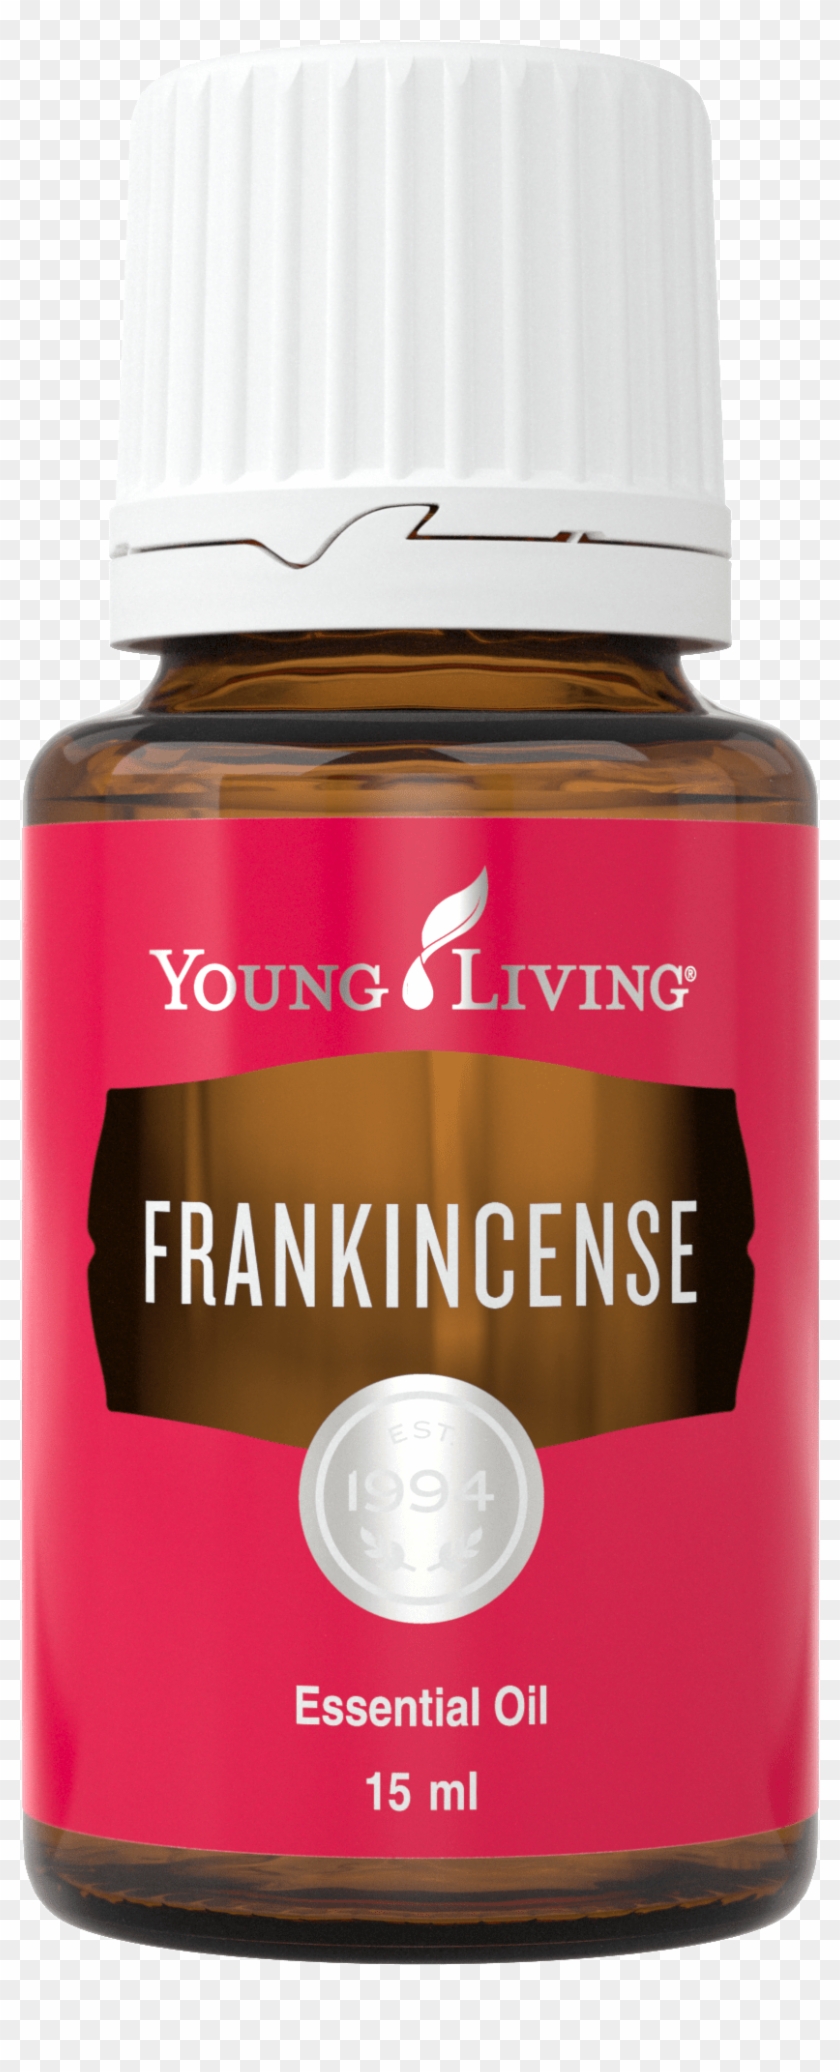 Young Living Frankincense Essential Oil - Oil Frankincense Clipart #5542922